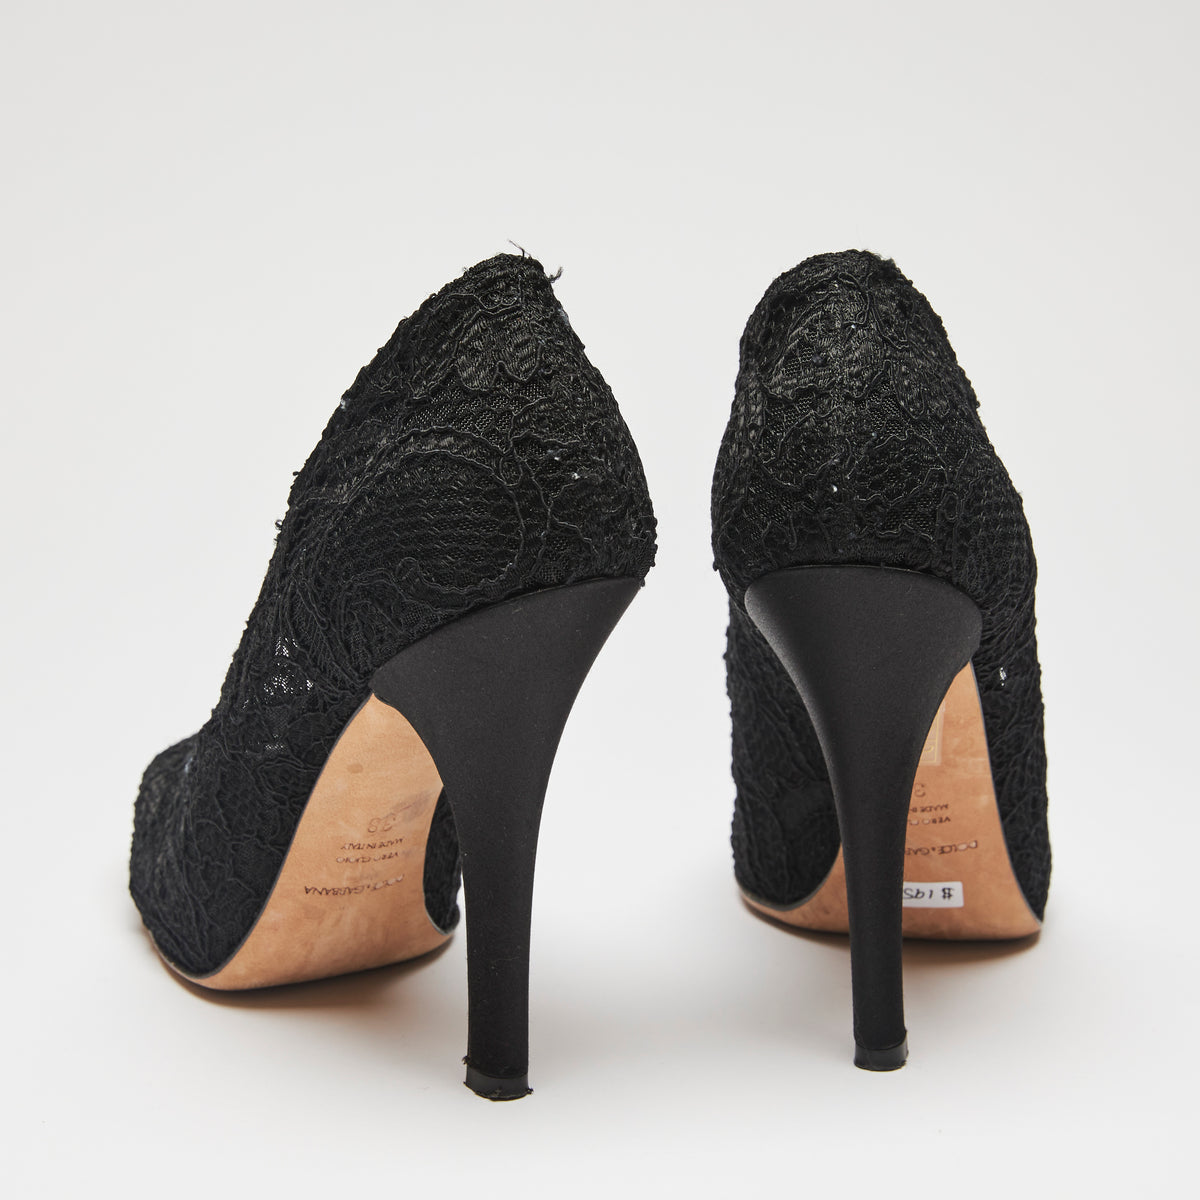 Pre-Loved Black Lace Fabric Round Toe Heels.(back)